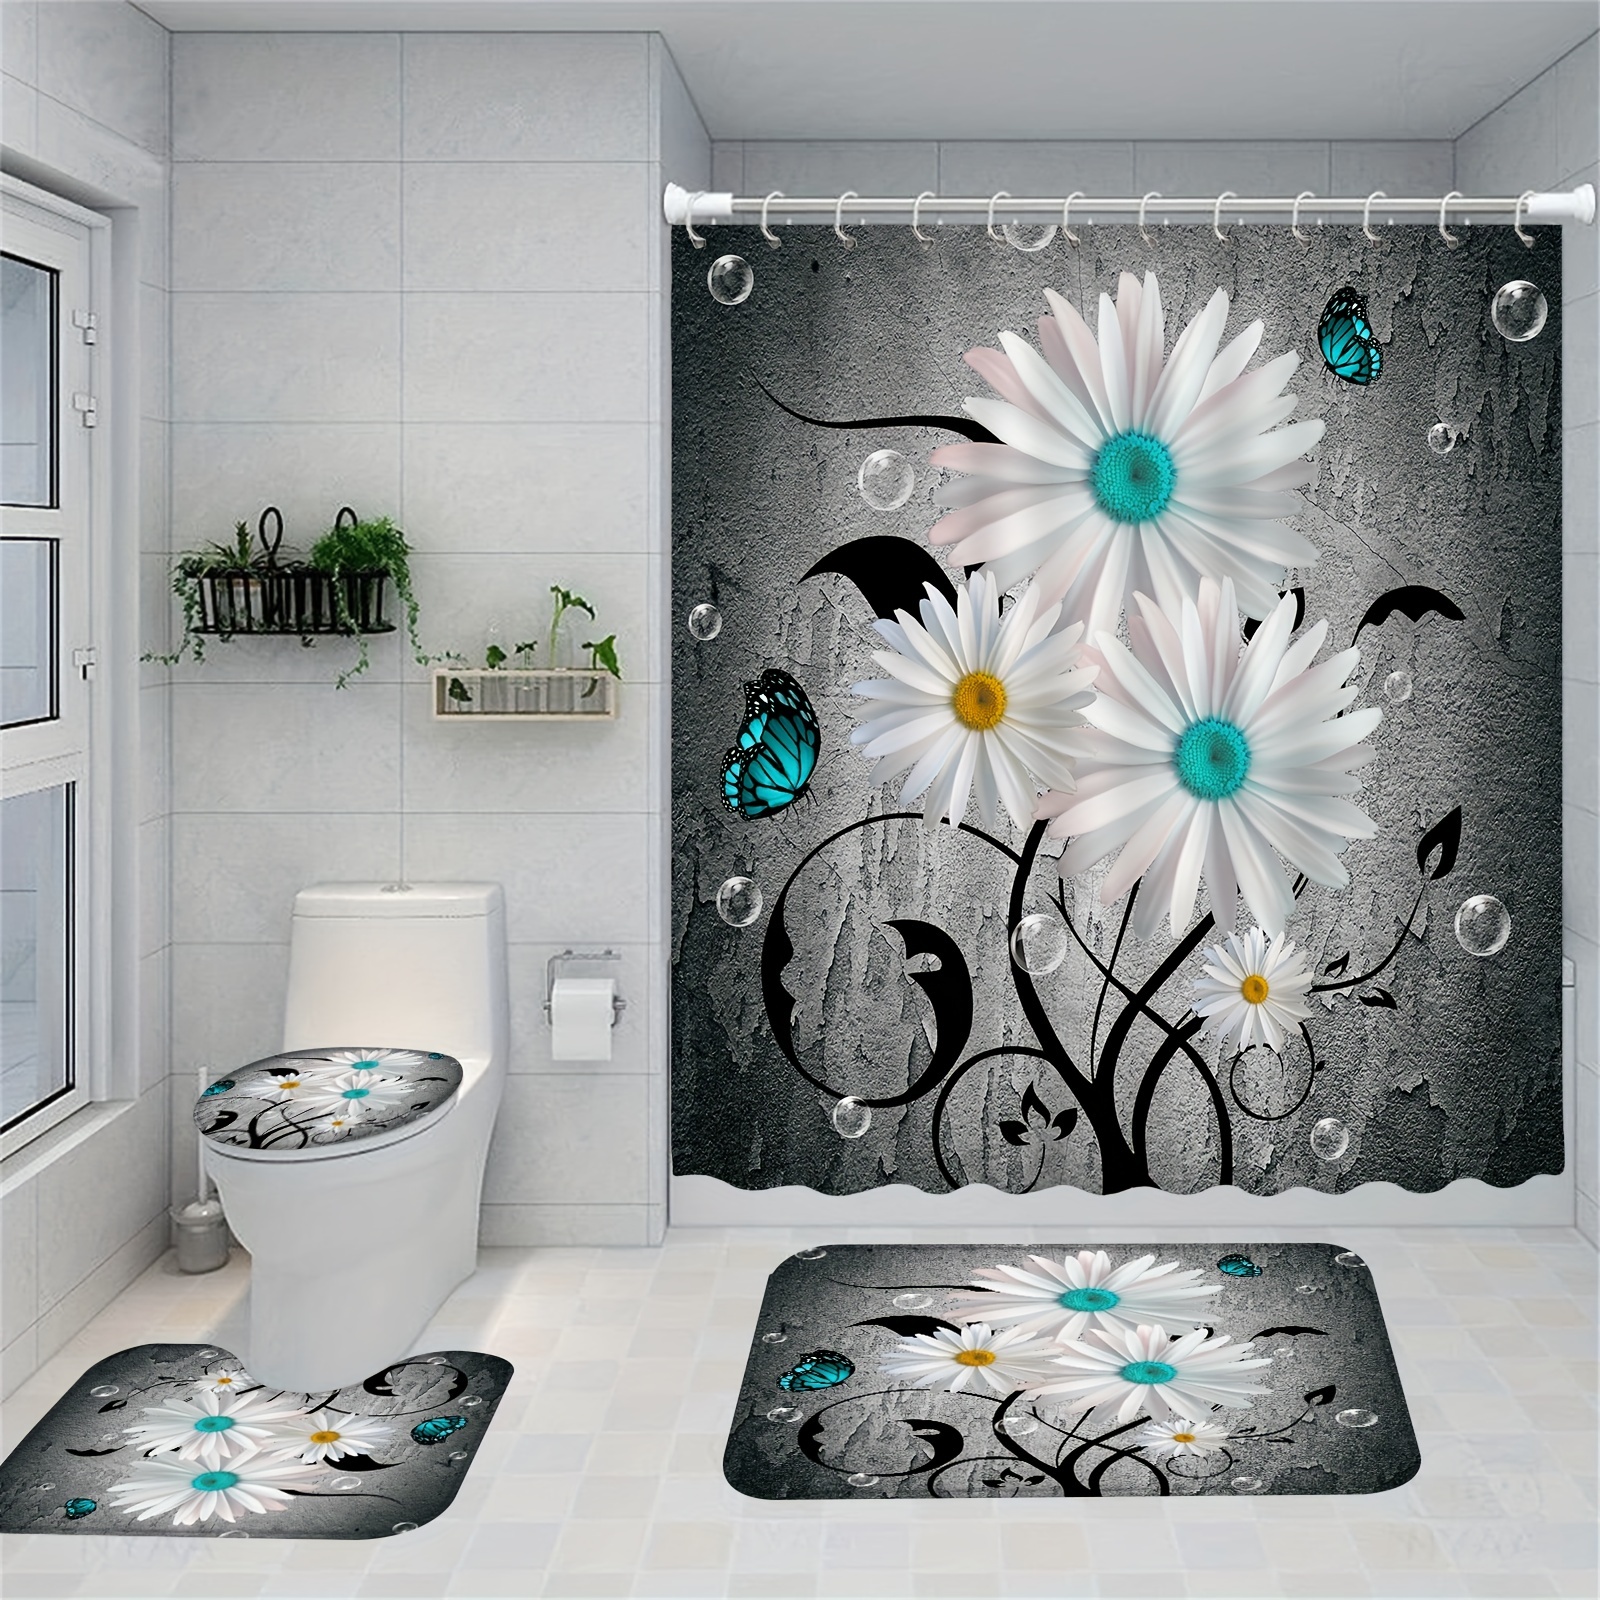 4pcs Daisy Shower Curtain and Rug Sets Bathroom Decor, Waterproof Shower Curtain with Hooks and 3pcs Toilet Cover Mat Set, Size: Shower Curtain